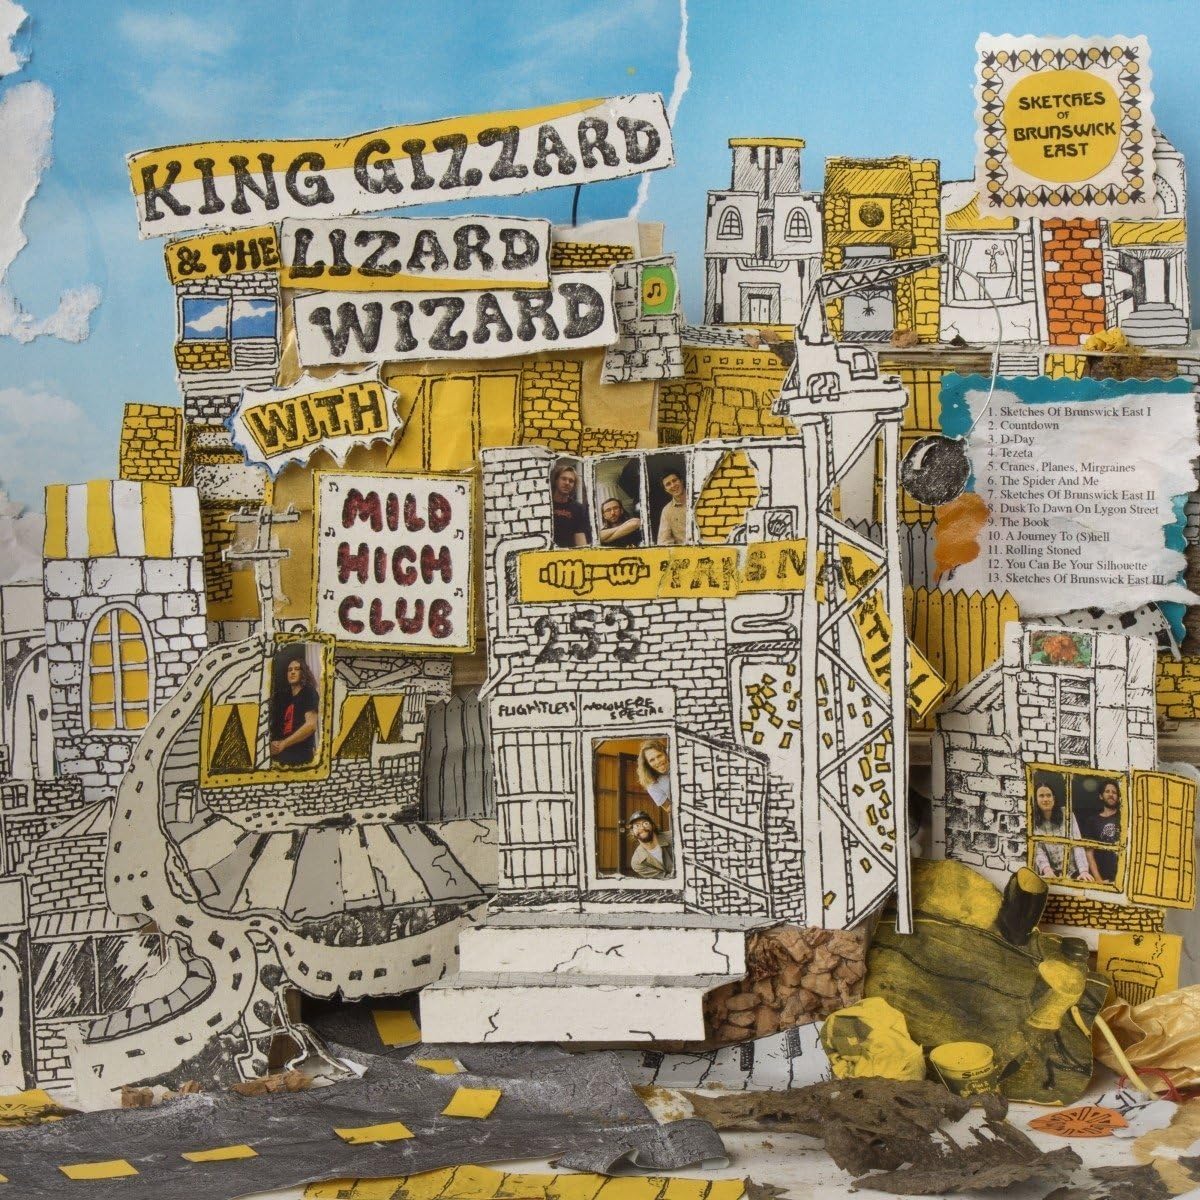 Sketches Of Brunswick East | King Gizzard & the Lizard Wizard, Mild High Club